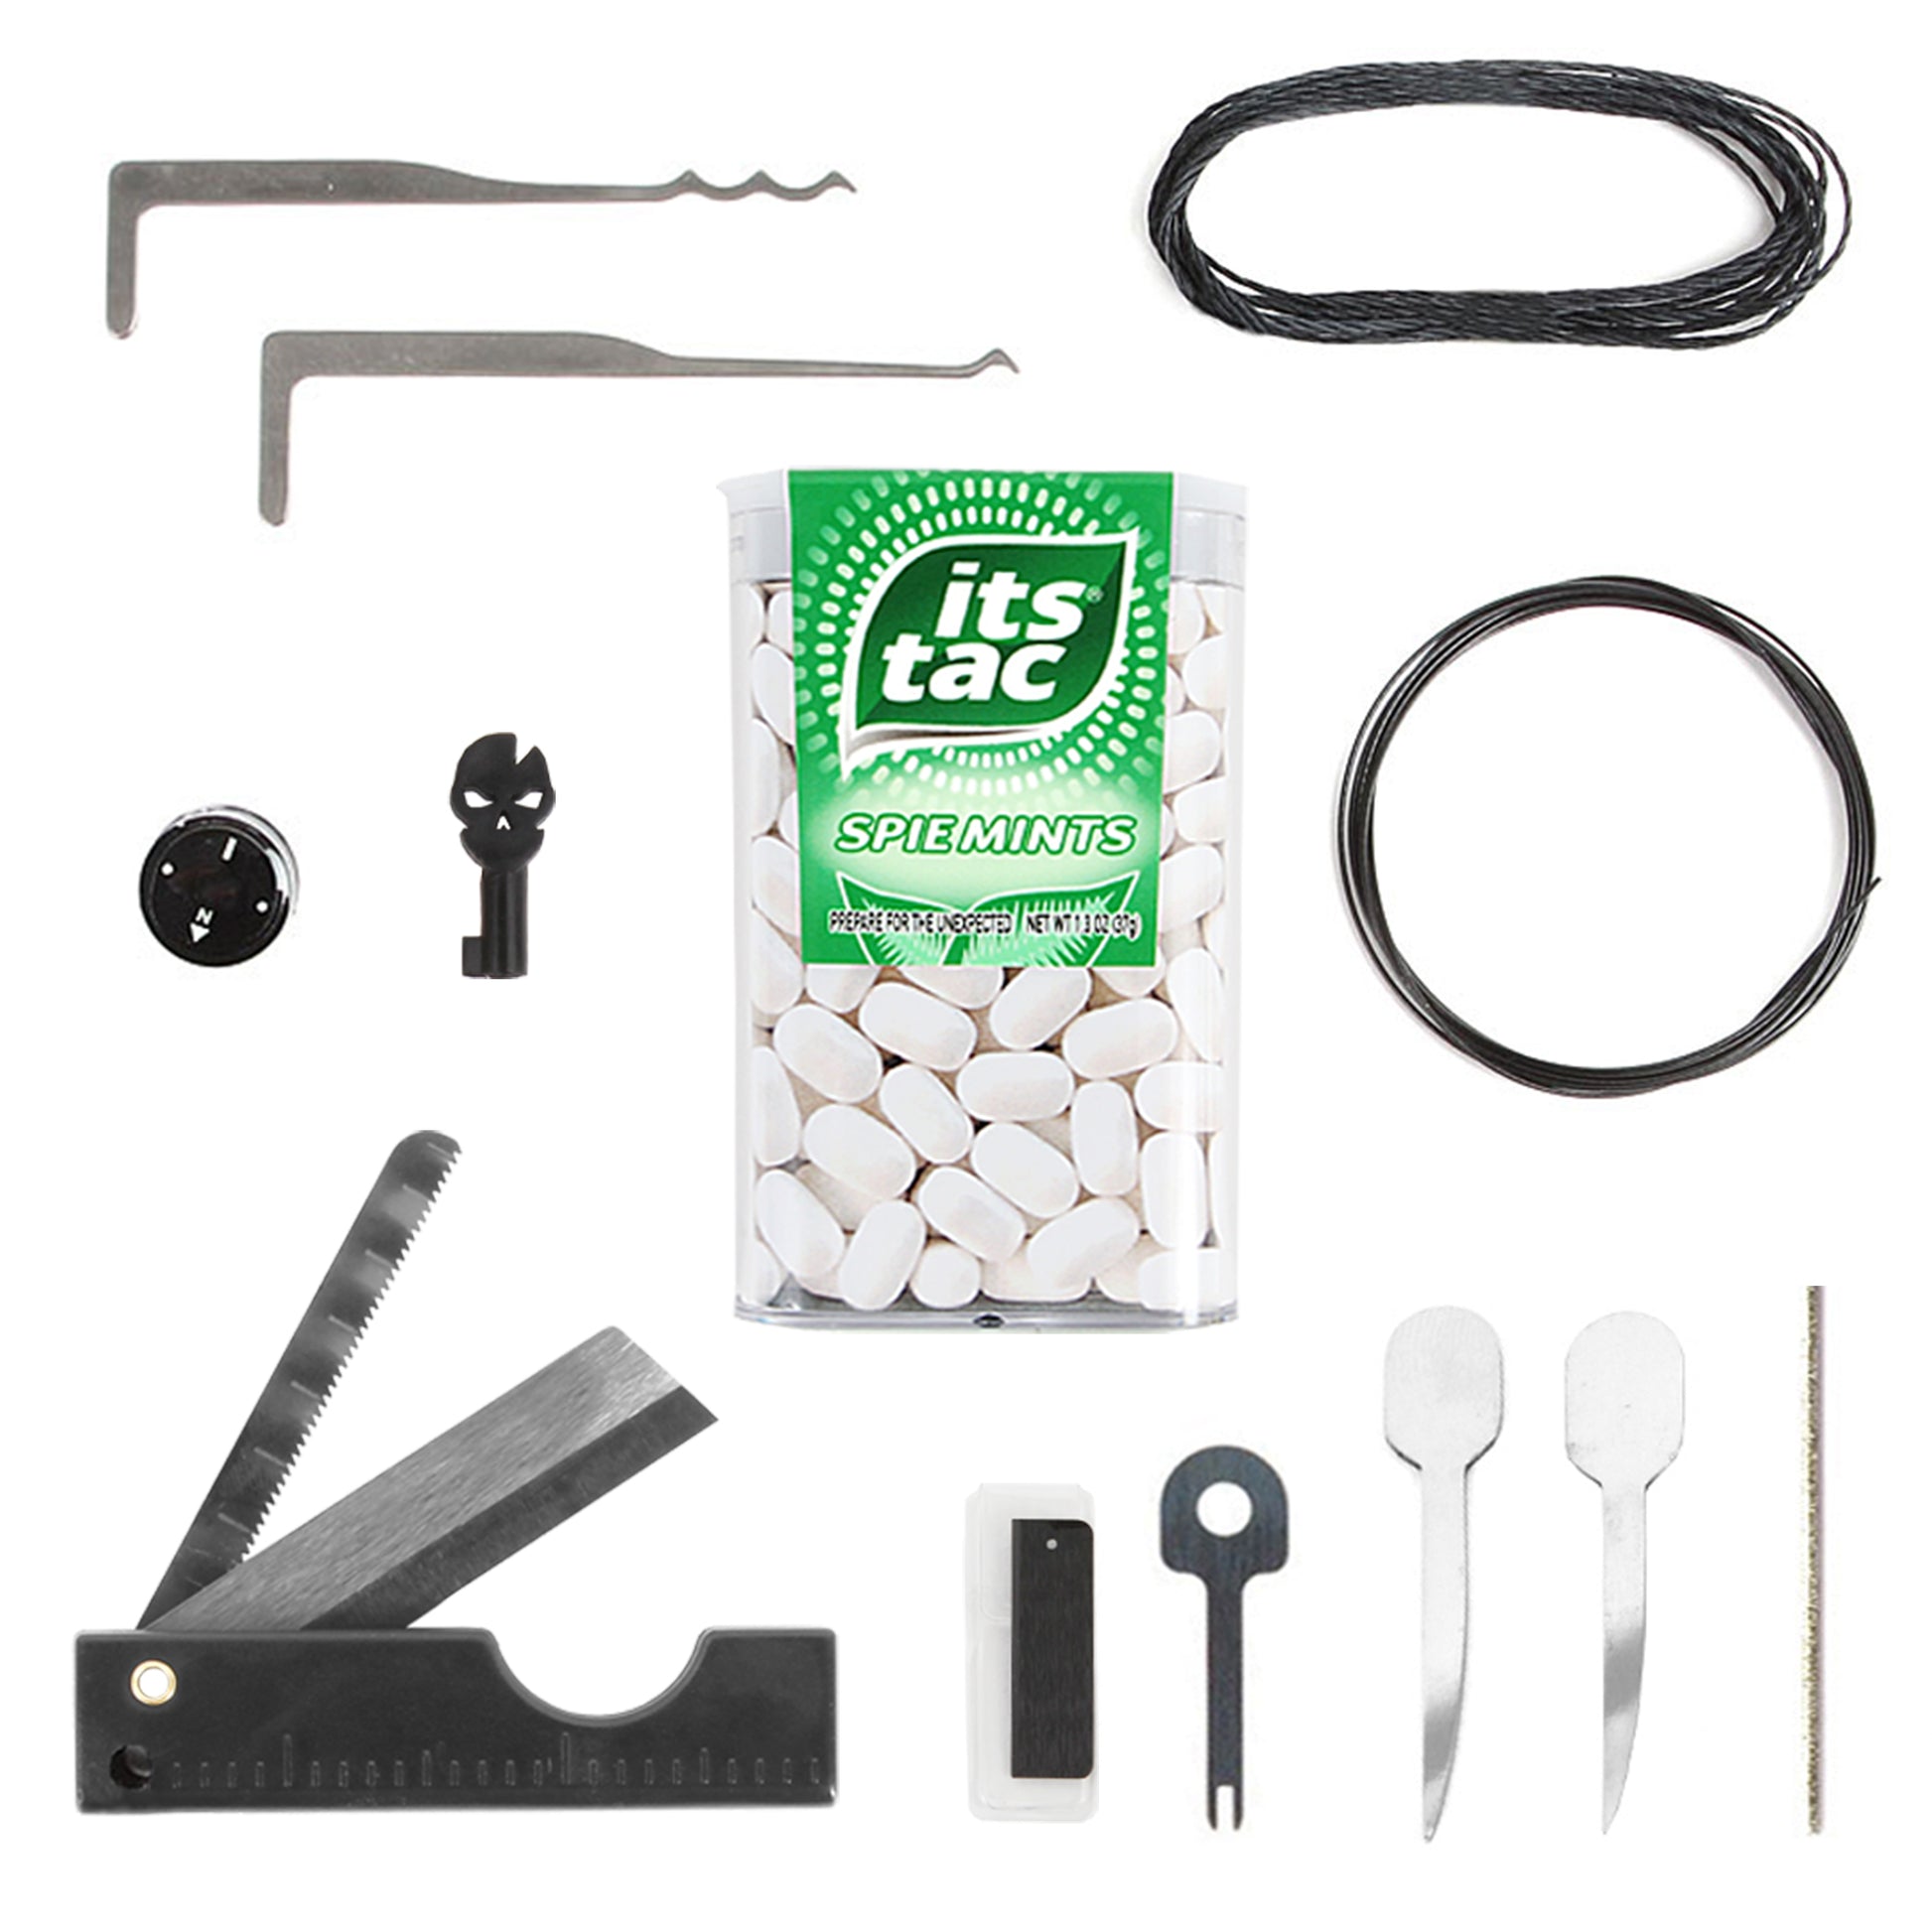 ITS SPIE Kit – ITS Tactical